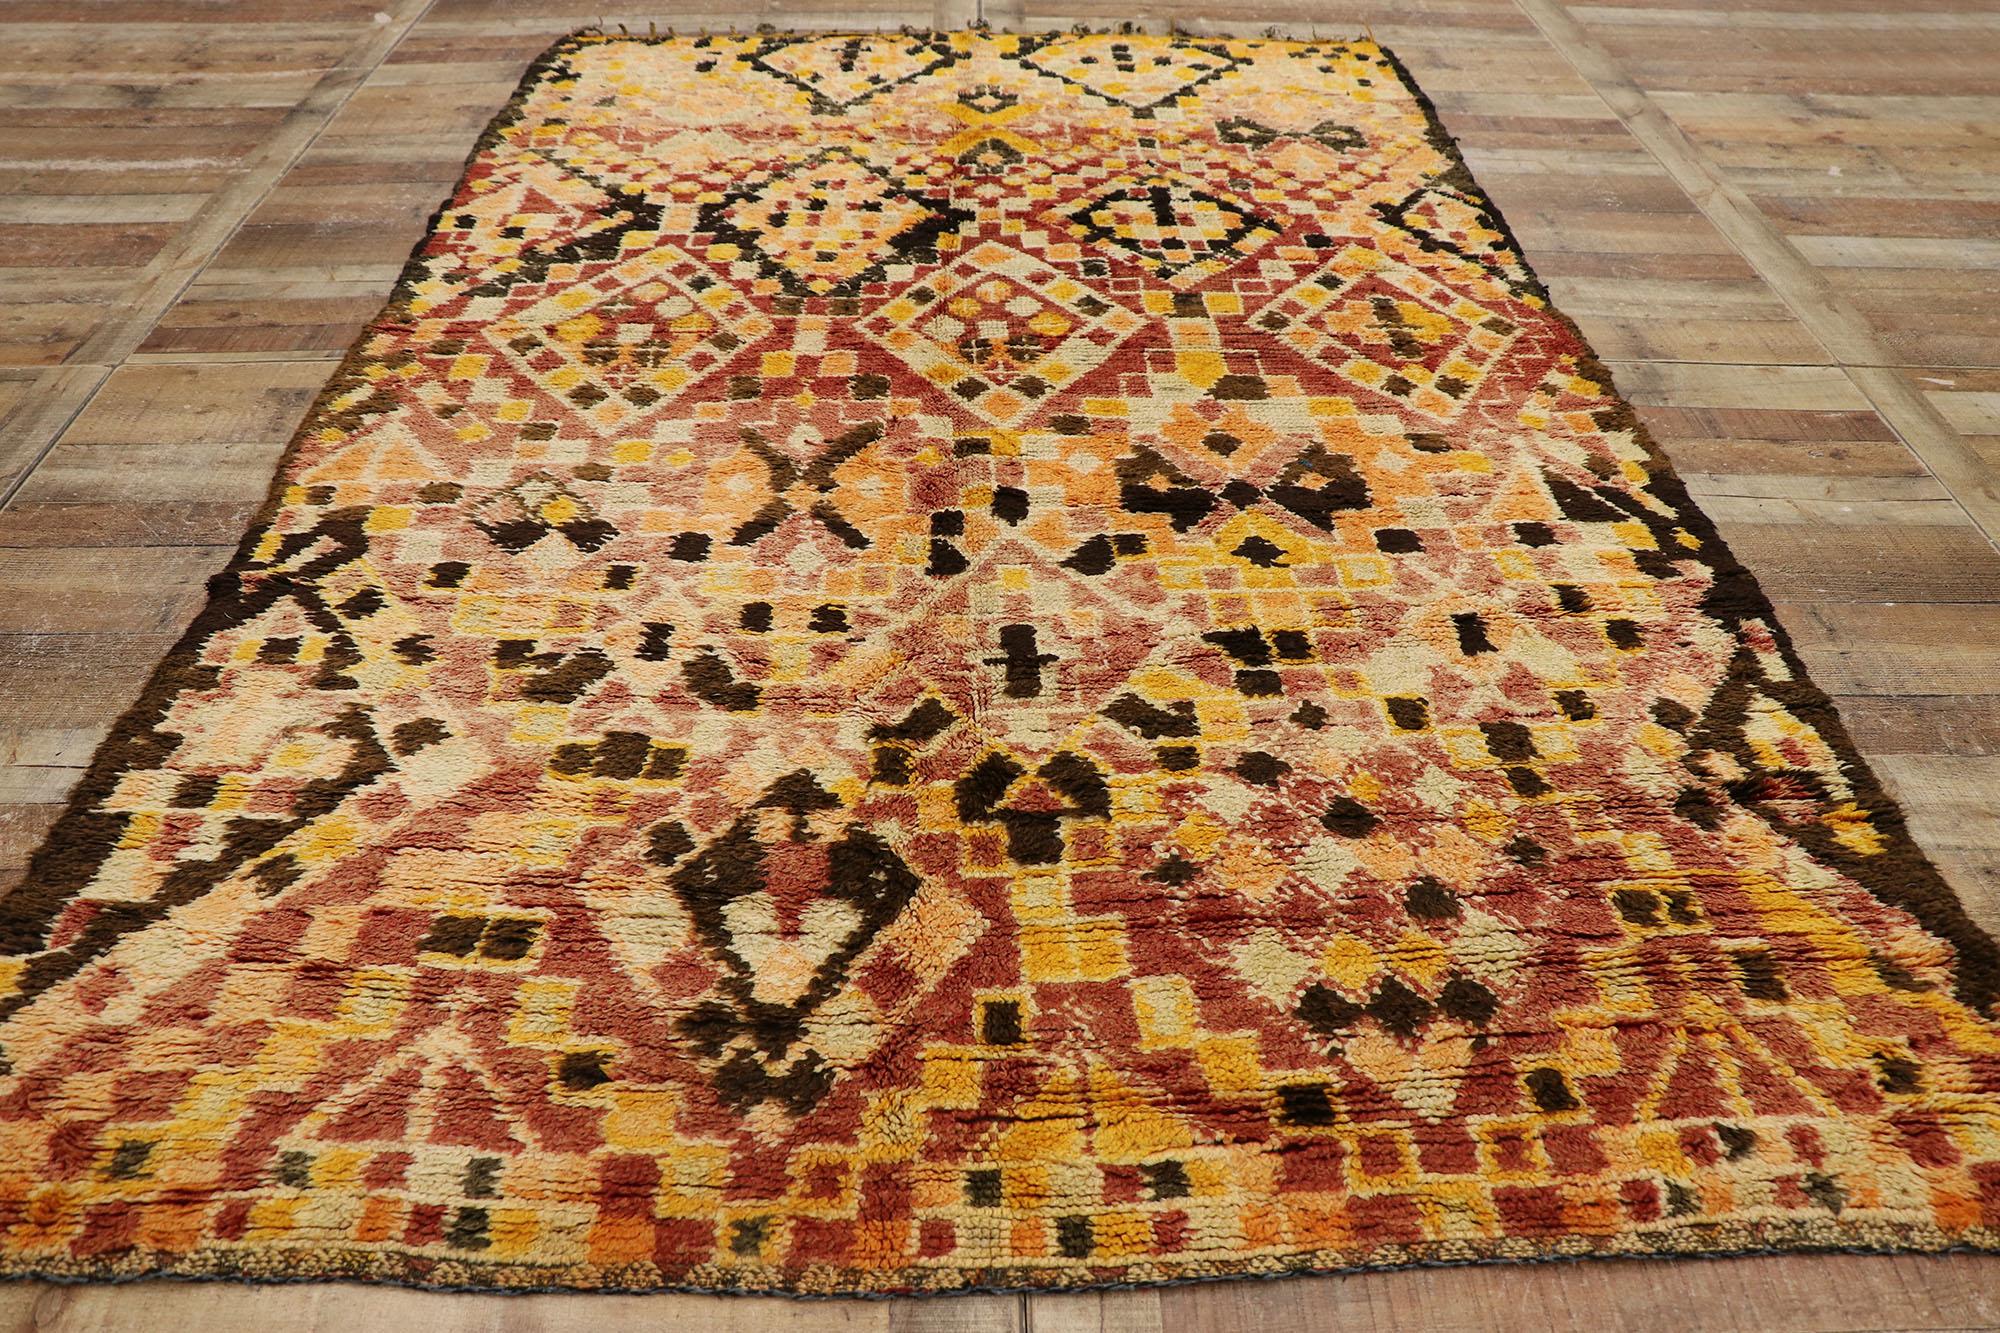 Wool Vintage Beni MGuild Moroccan Rug, Global Style Meets Eclectic Boho Chic For Sale